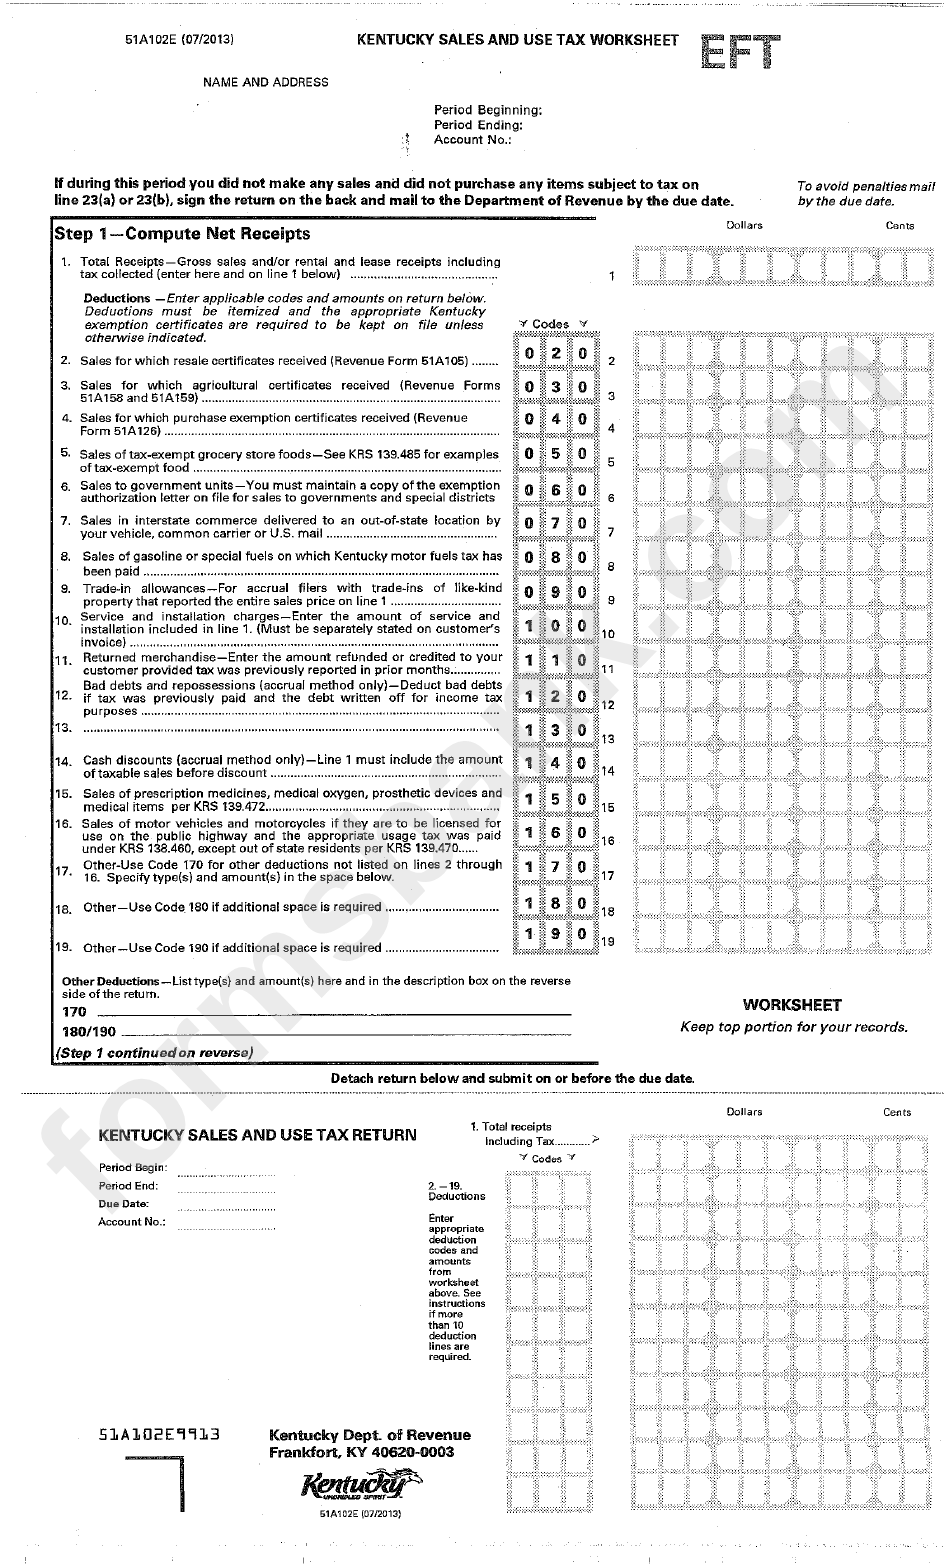 Form 51a102e Kentucky Sales / Use Tax Worksheet printable pdf download